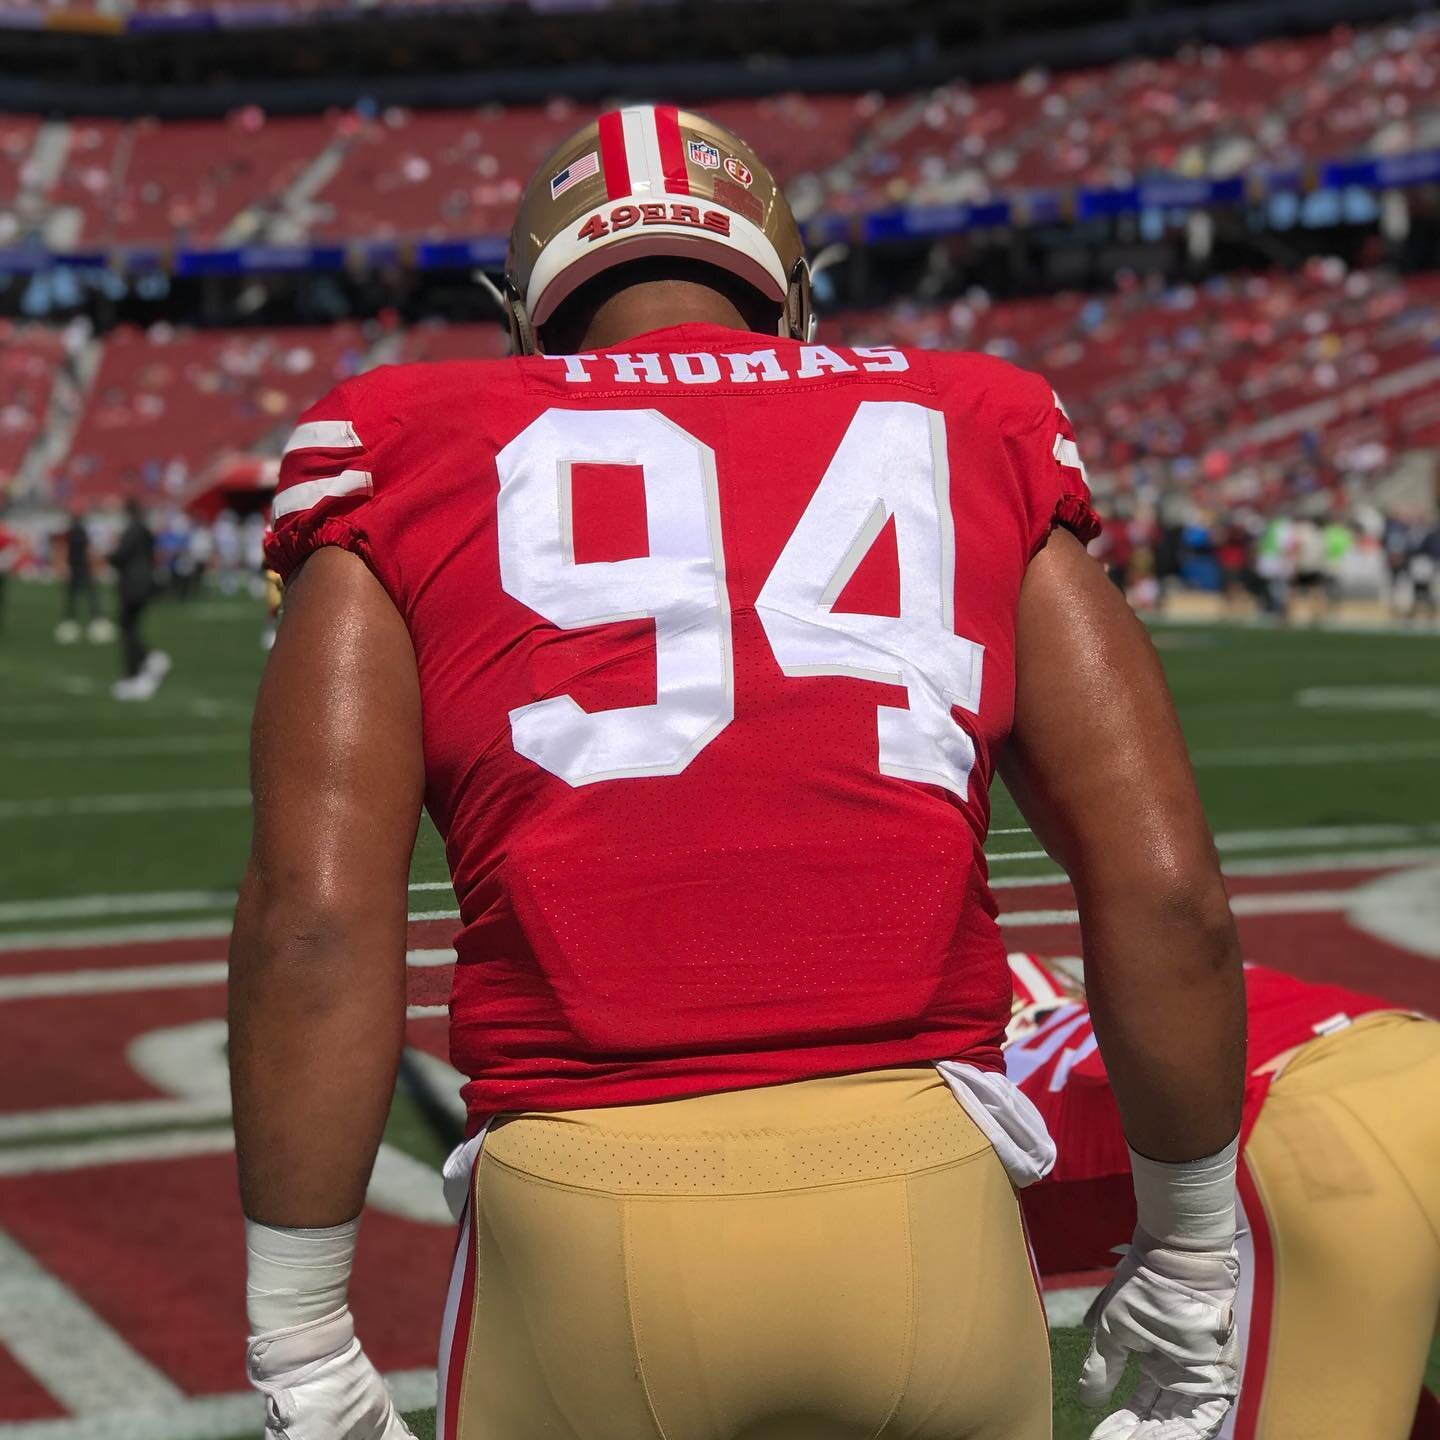 The worst part of football is when players who have worked their entire lives for one goal, have that taken away from them because of an injury. Quick healing wishes to #49ers @sollythomas90